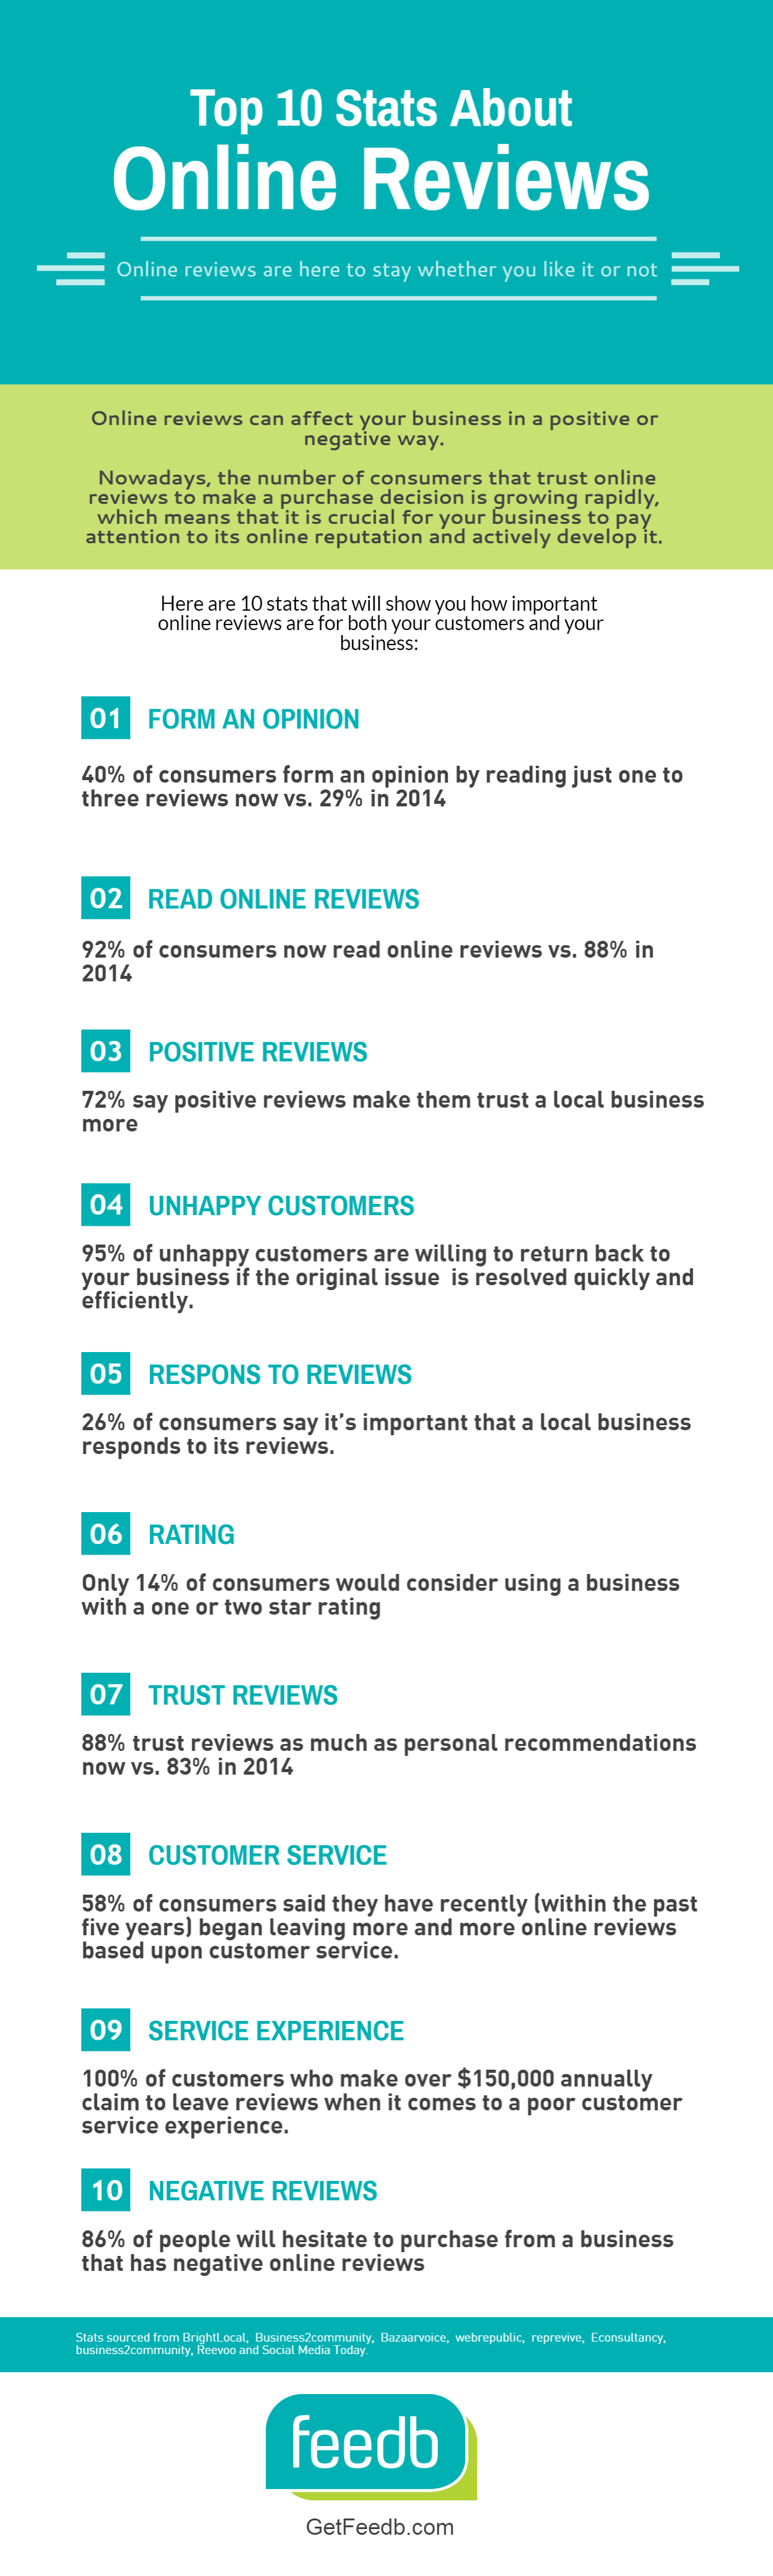 Top 10 Stats About Online Reviews | Feebd